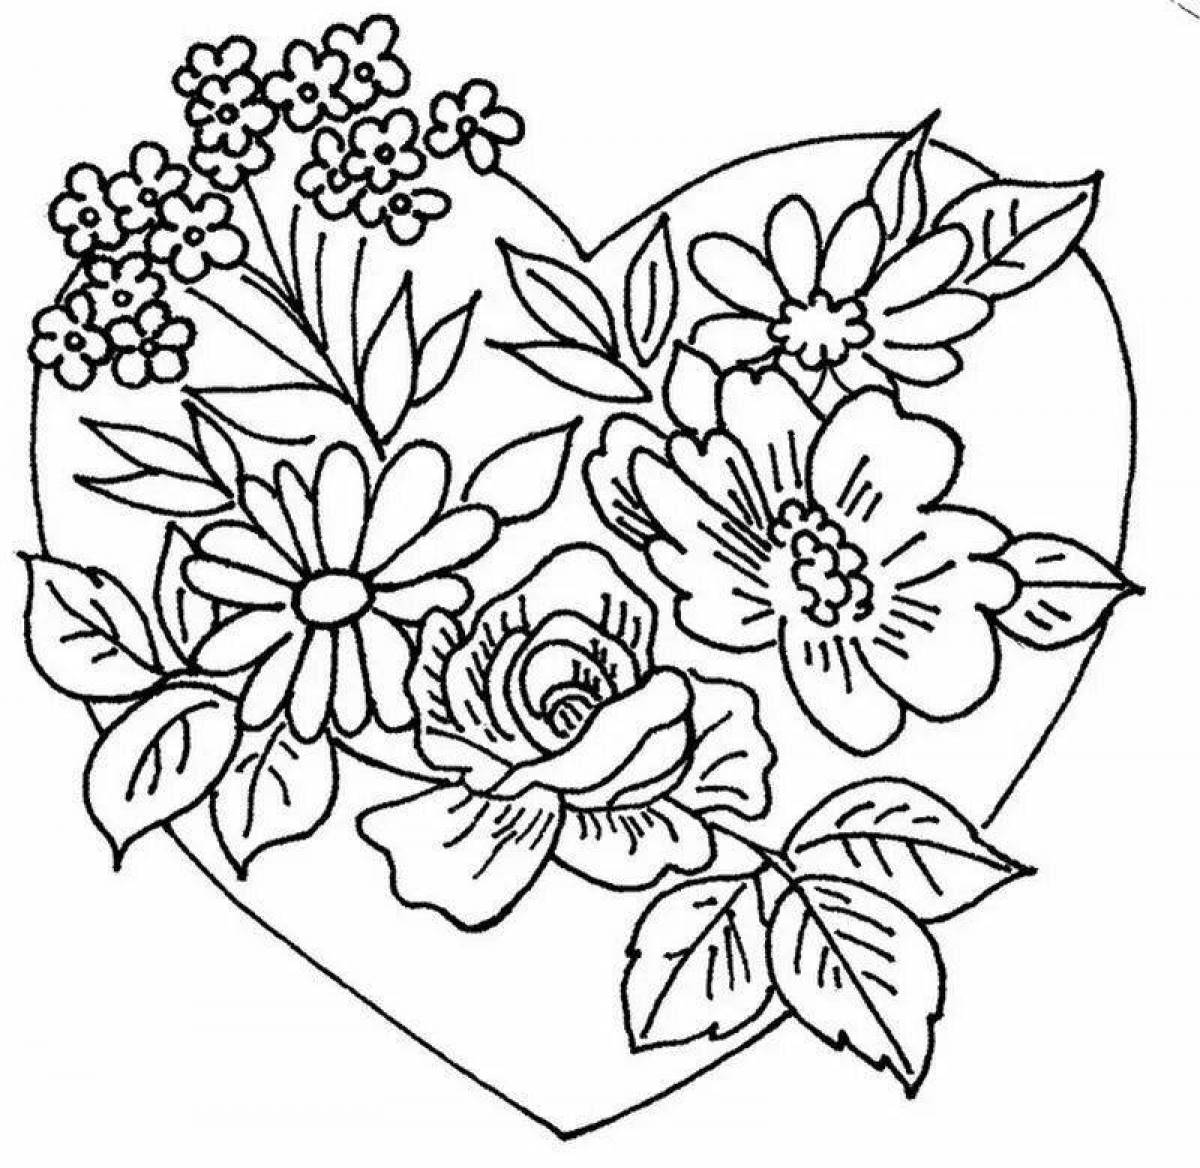 Blossoming tatyana's day coloring page